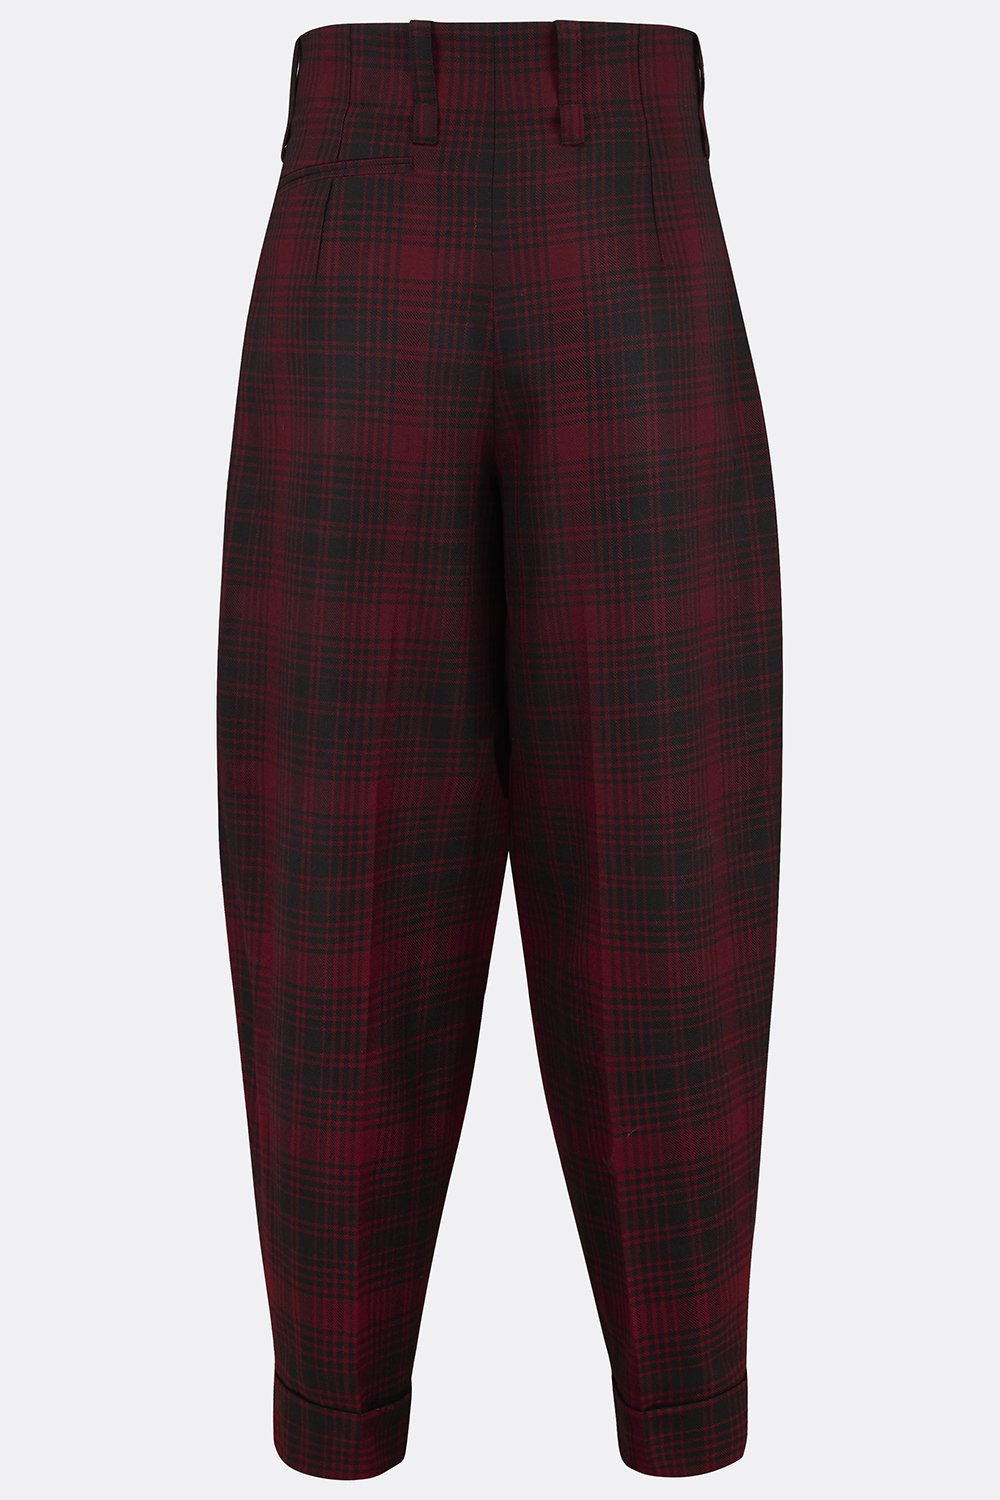 DILLINGER TROUSERS IN RED AND BLACK CHECK-menswear-A Child Of The Jago